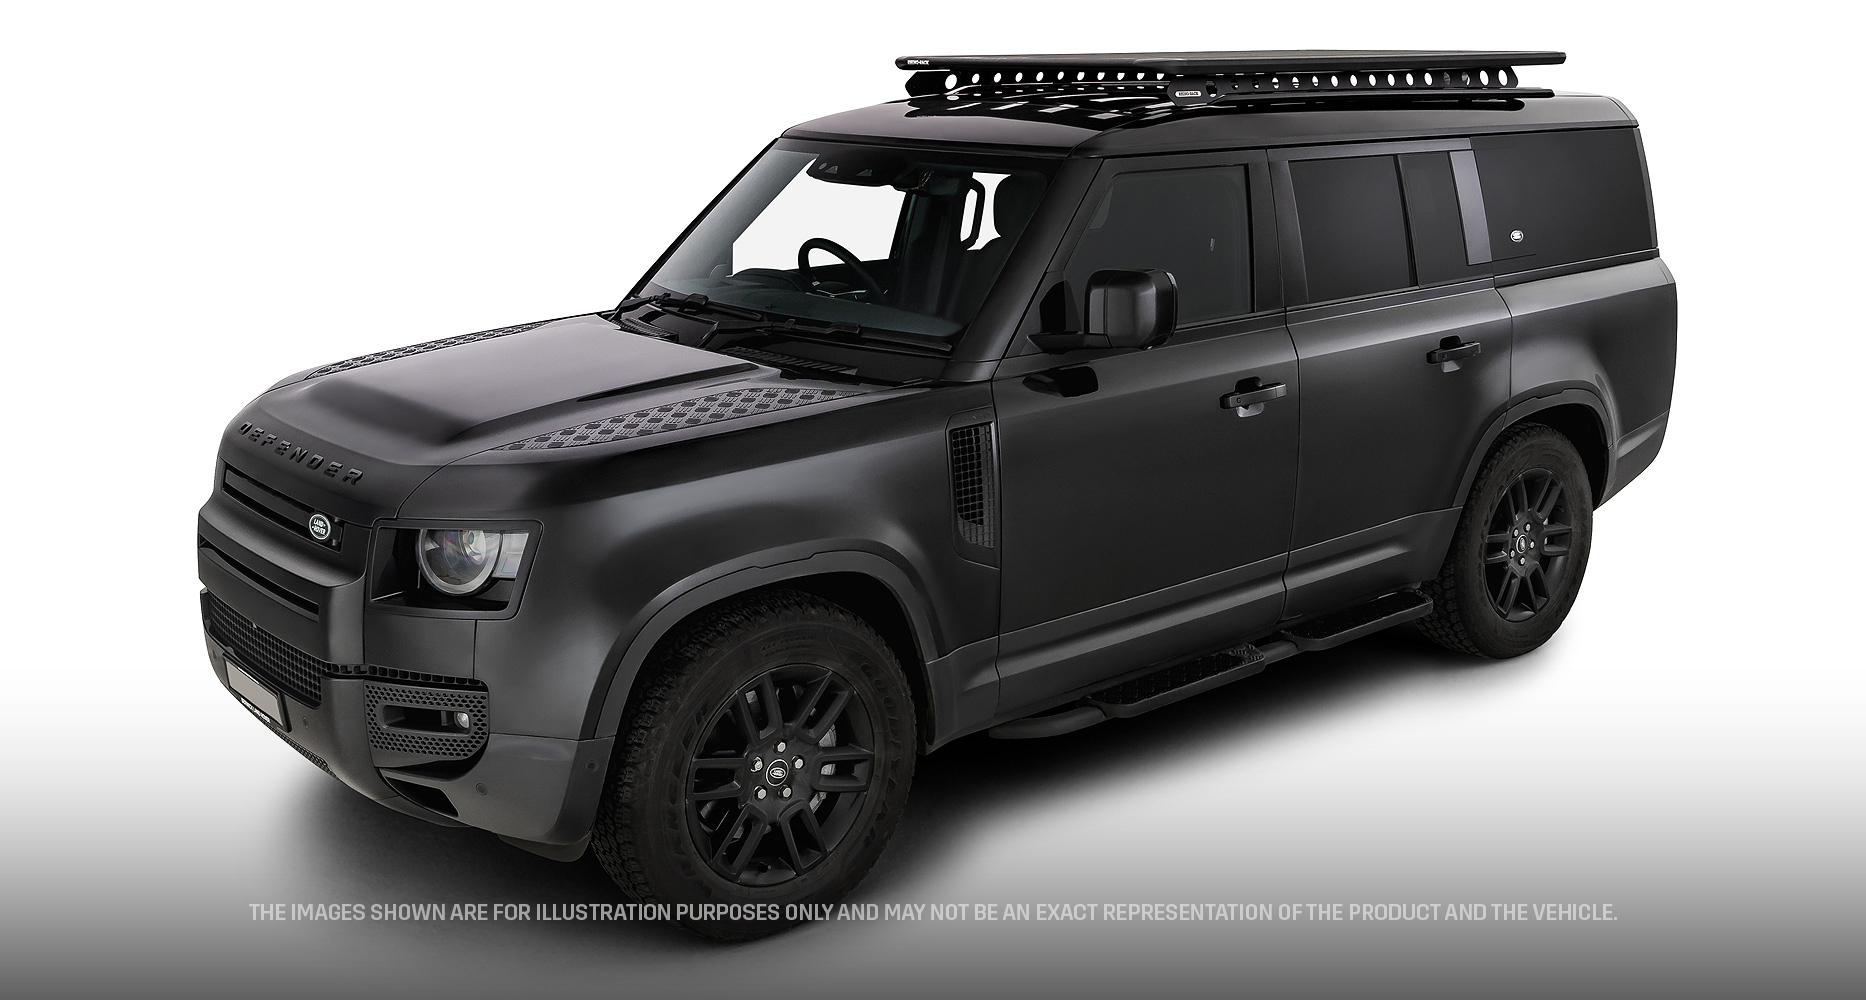 Rhino Rack JC-01934 Pioneer 6 Platform (2100mm x 1240mm) with Backbone for Land Rover Defender 90 Gen2 3dr SUV with Factory Fitted Track (2020 onwards) - Factory Point Mount